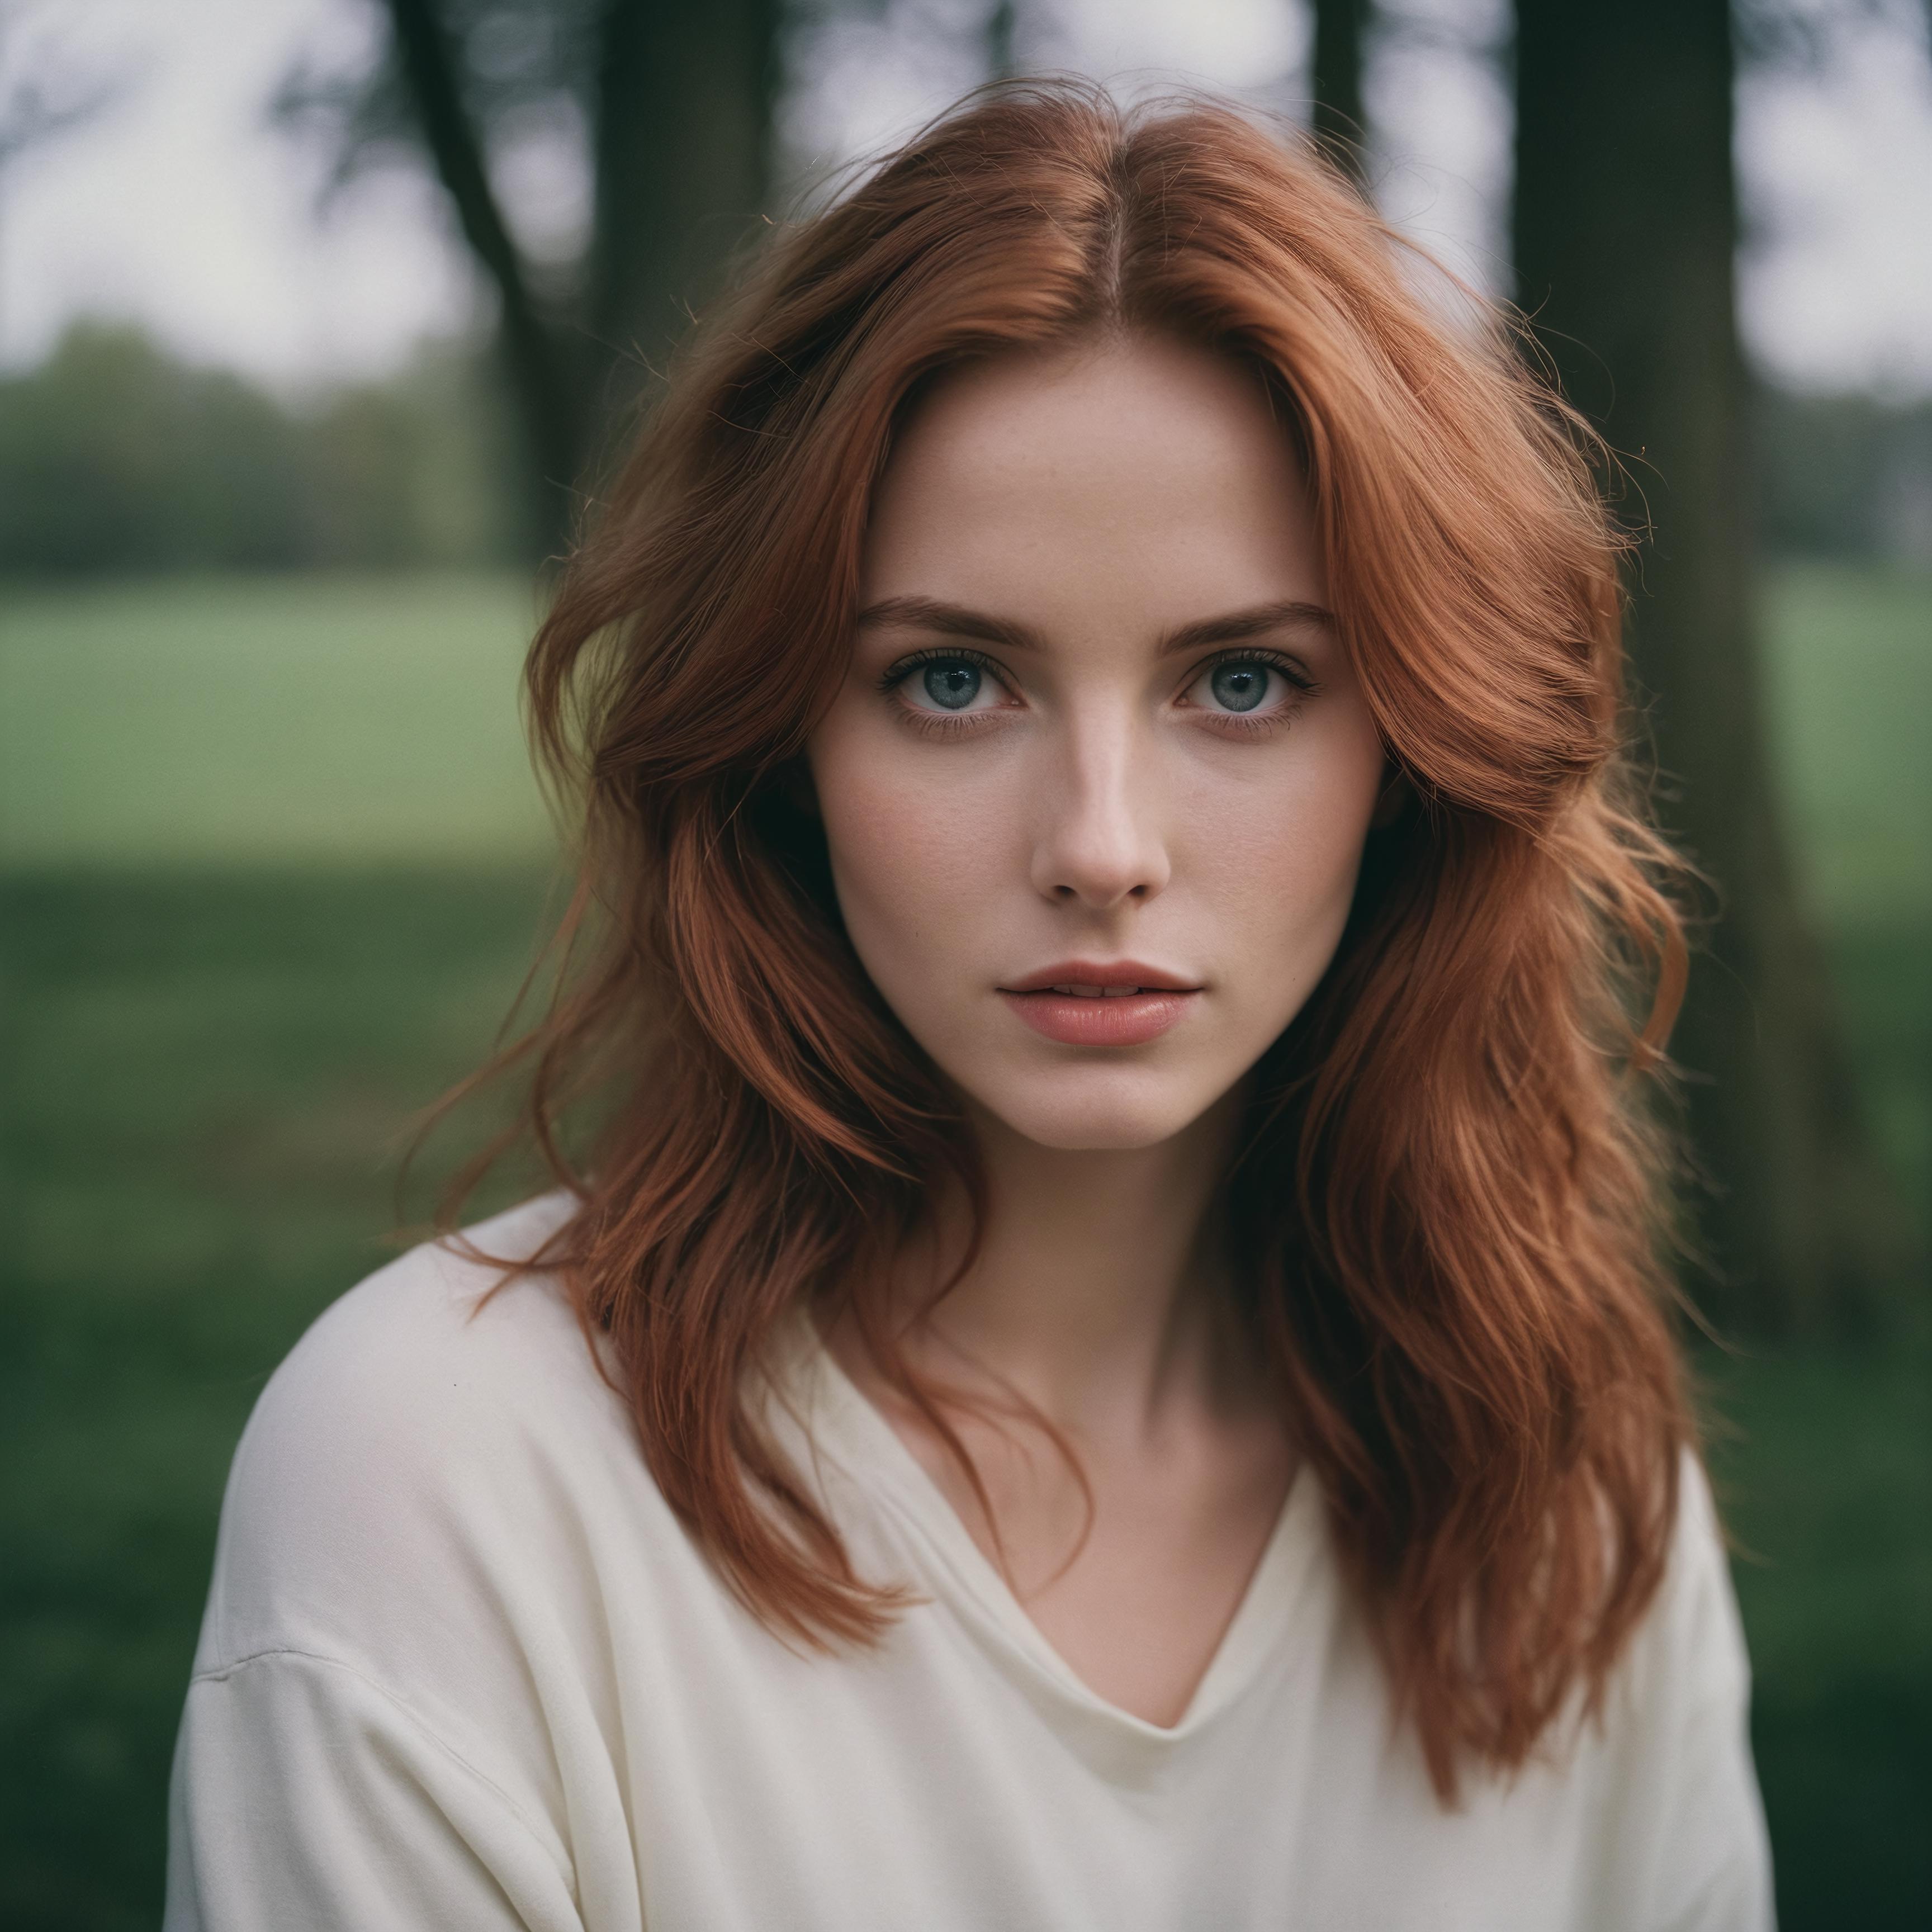 A Woman with Red Hair in a White Shirt Posing in the Forest.